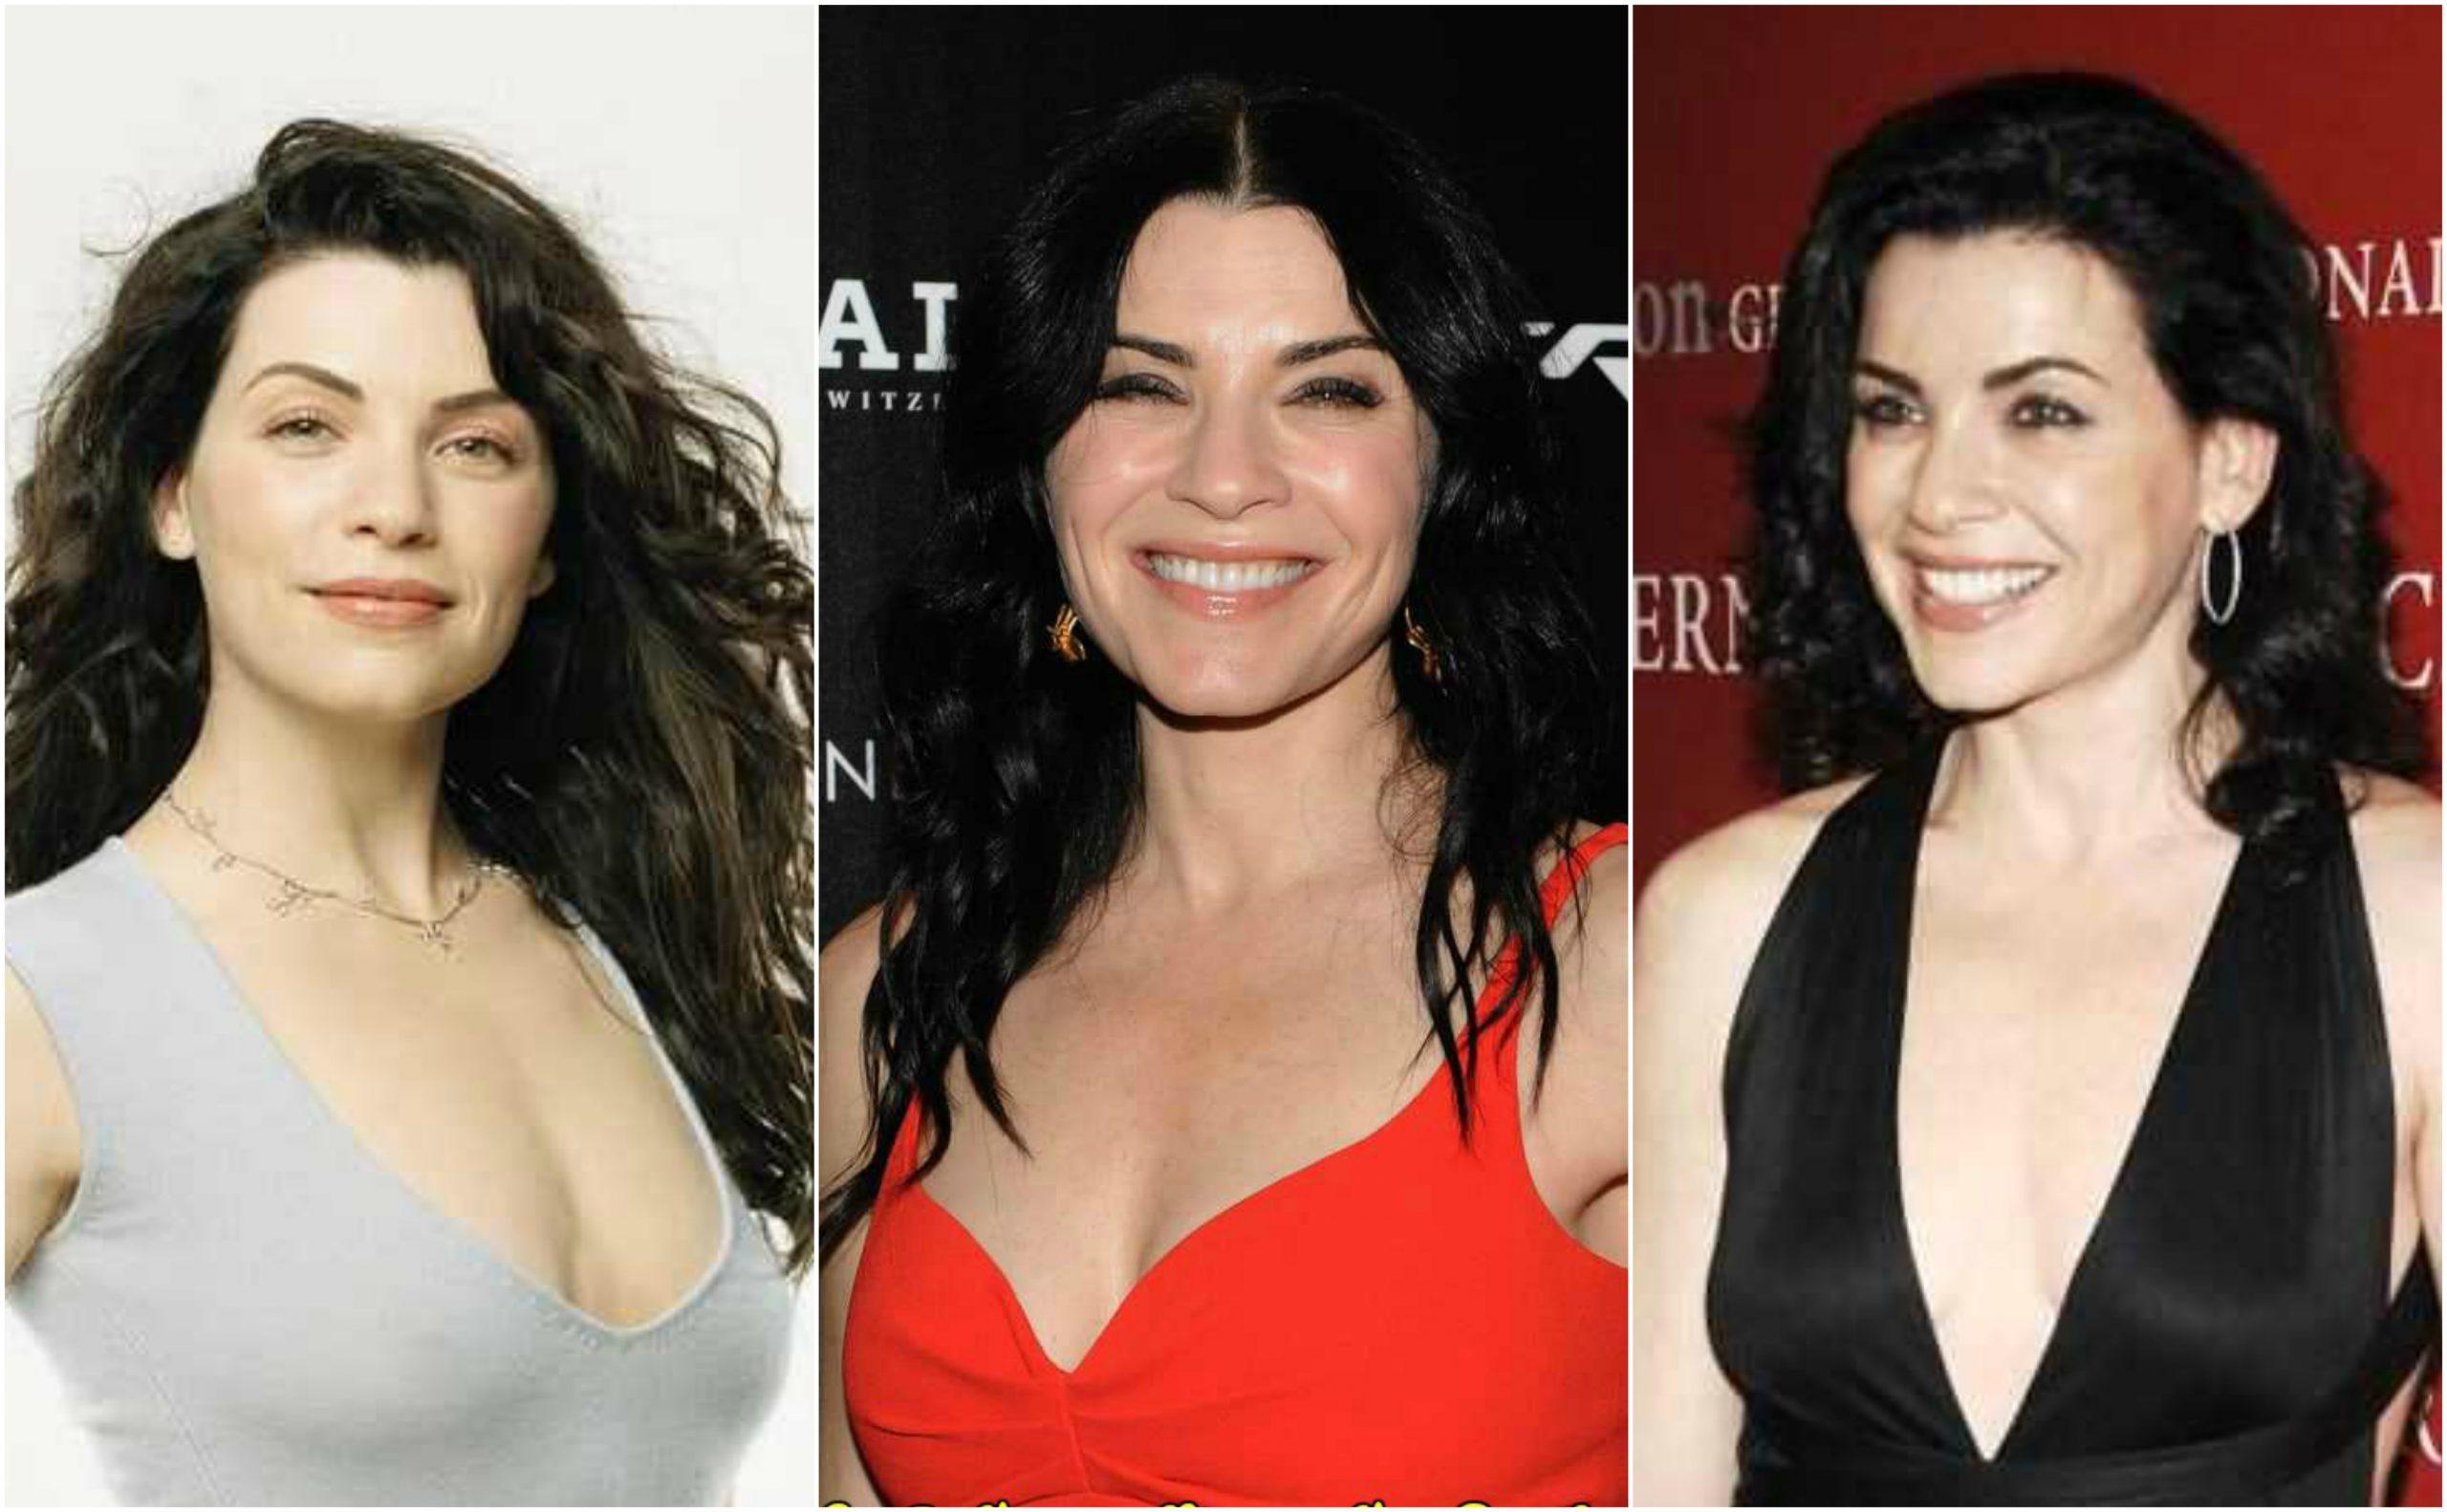 60+ Hottest Julianna Margulies Big Boobs Pictures That Will Make Your Heart Pound For Her